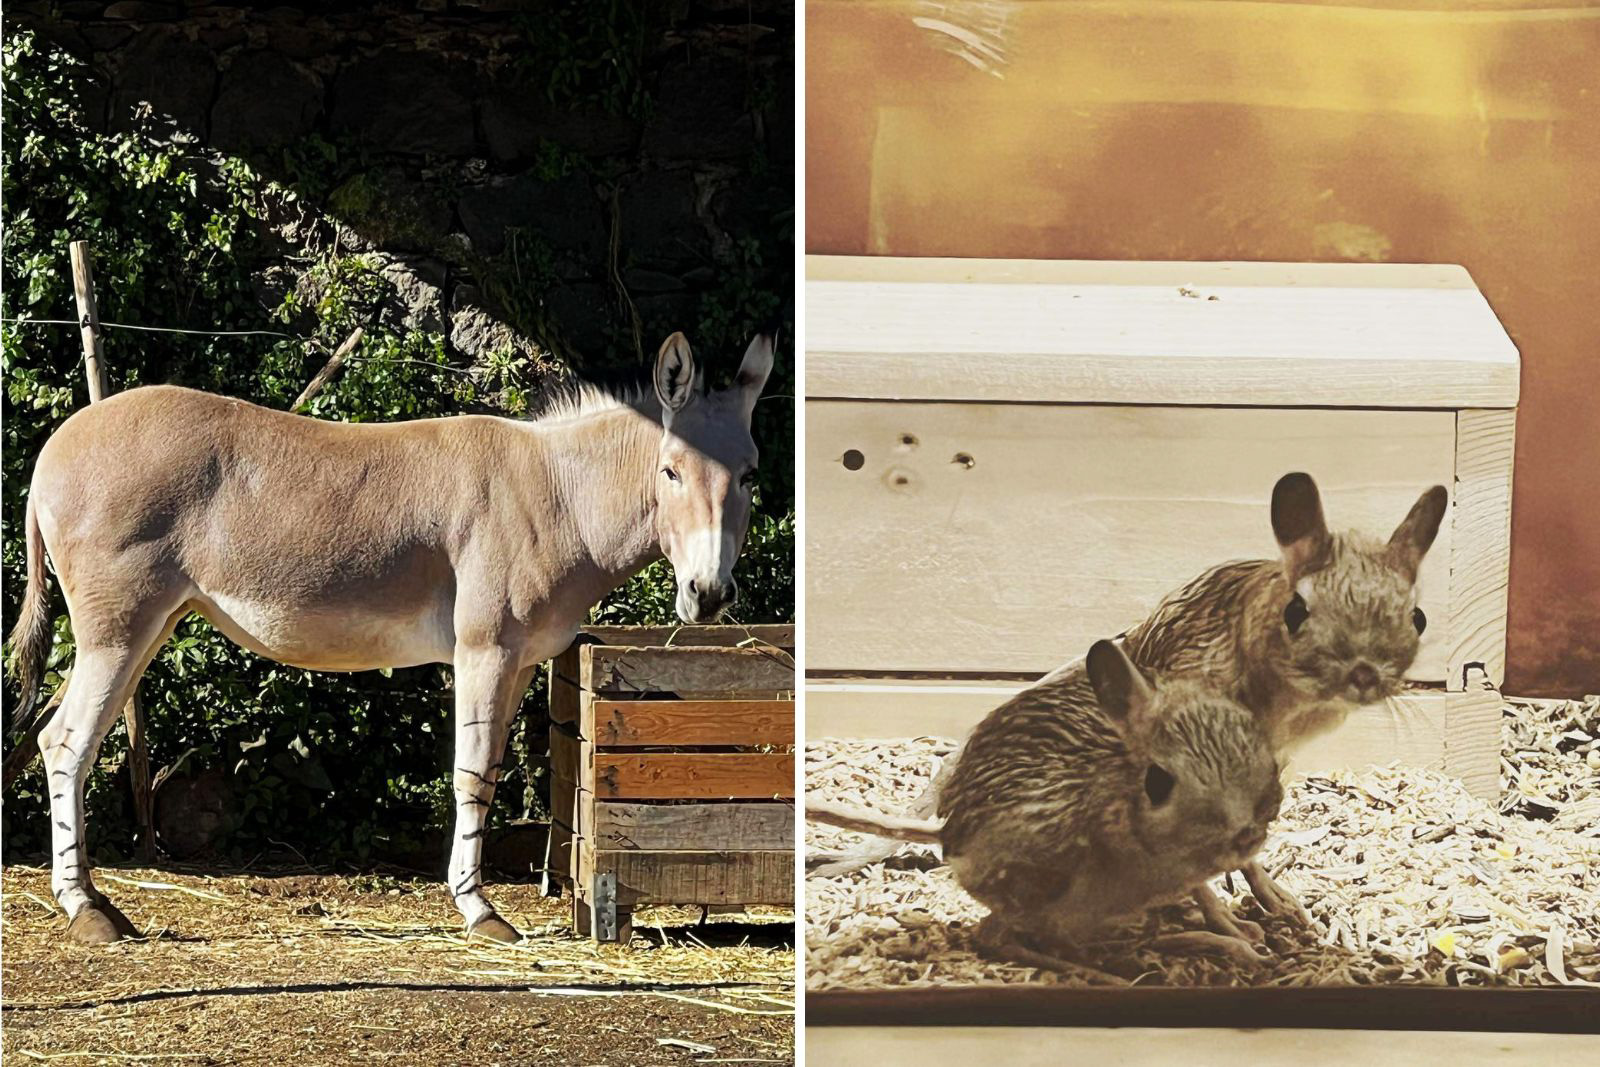 A photo composite of a Somali donkey and Jerboa desert rodents